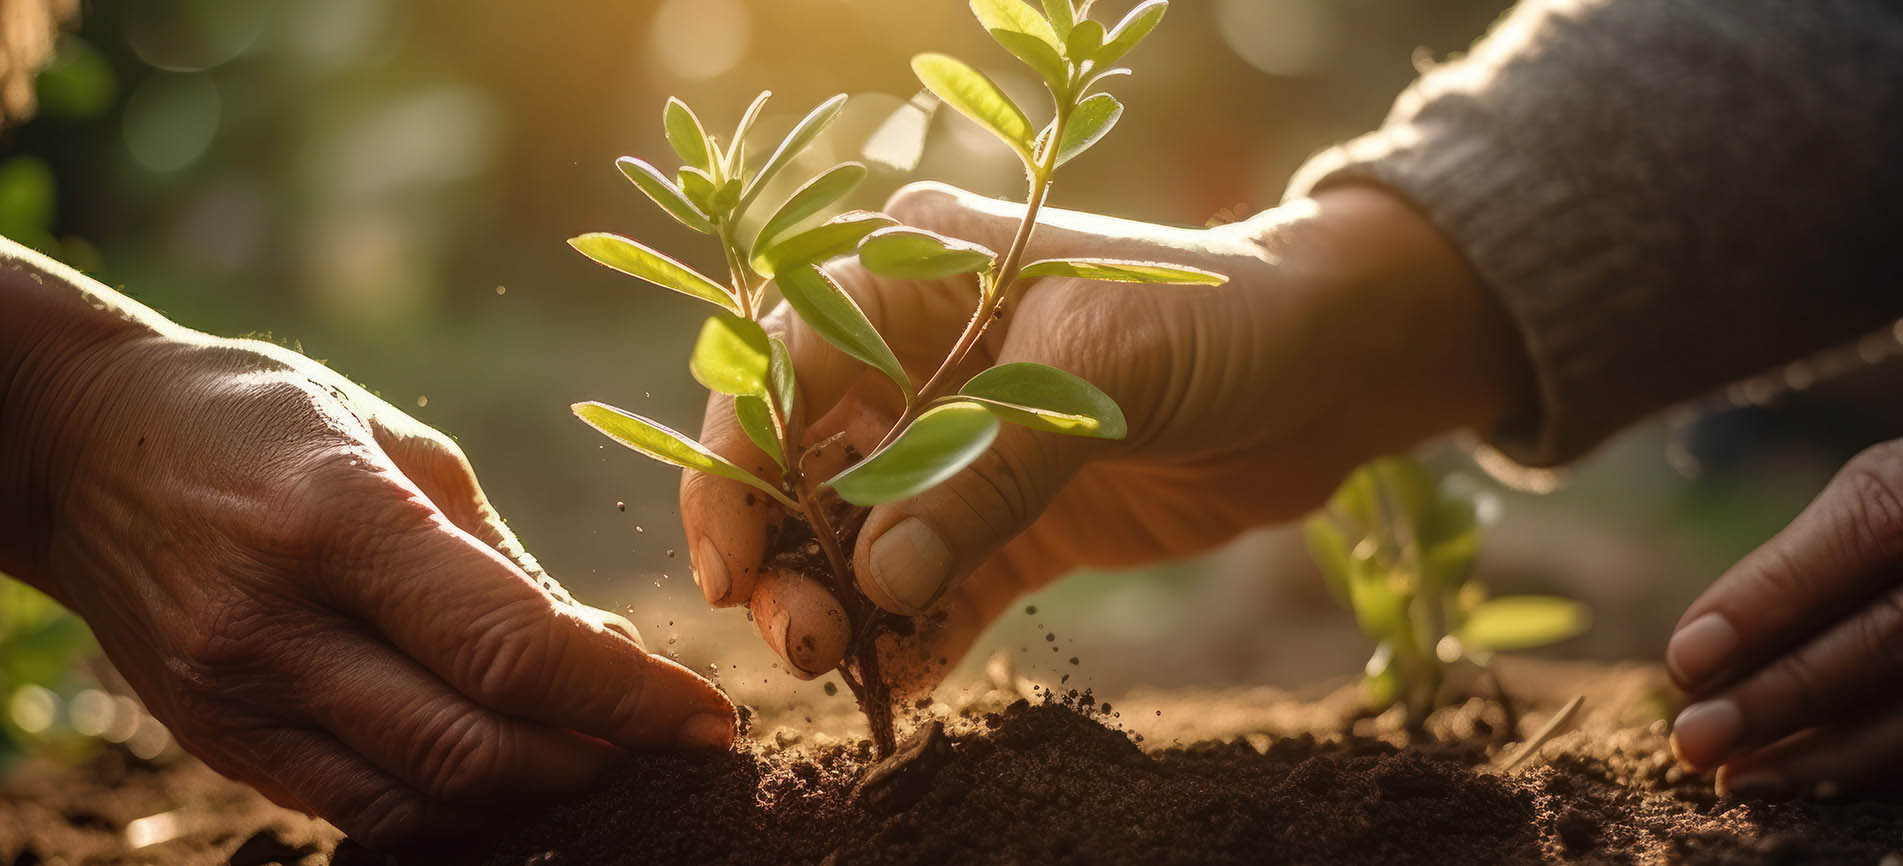 Close-up of two hands planting a tiny plant into soil on a sun-drenched day.